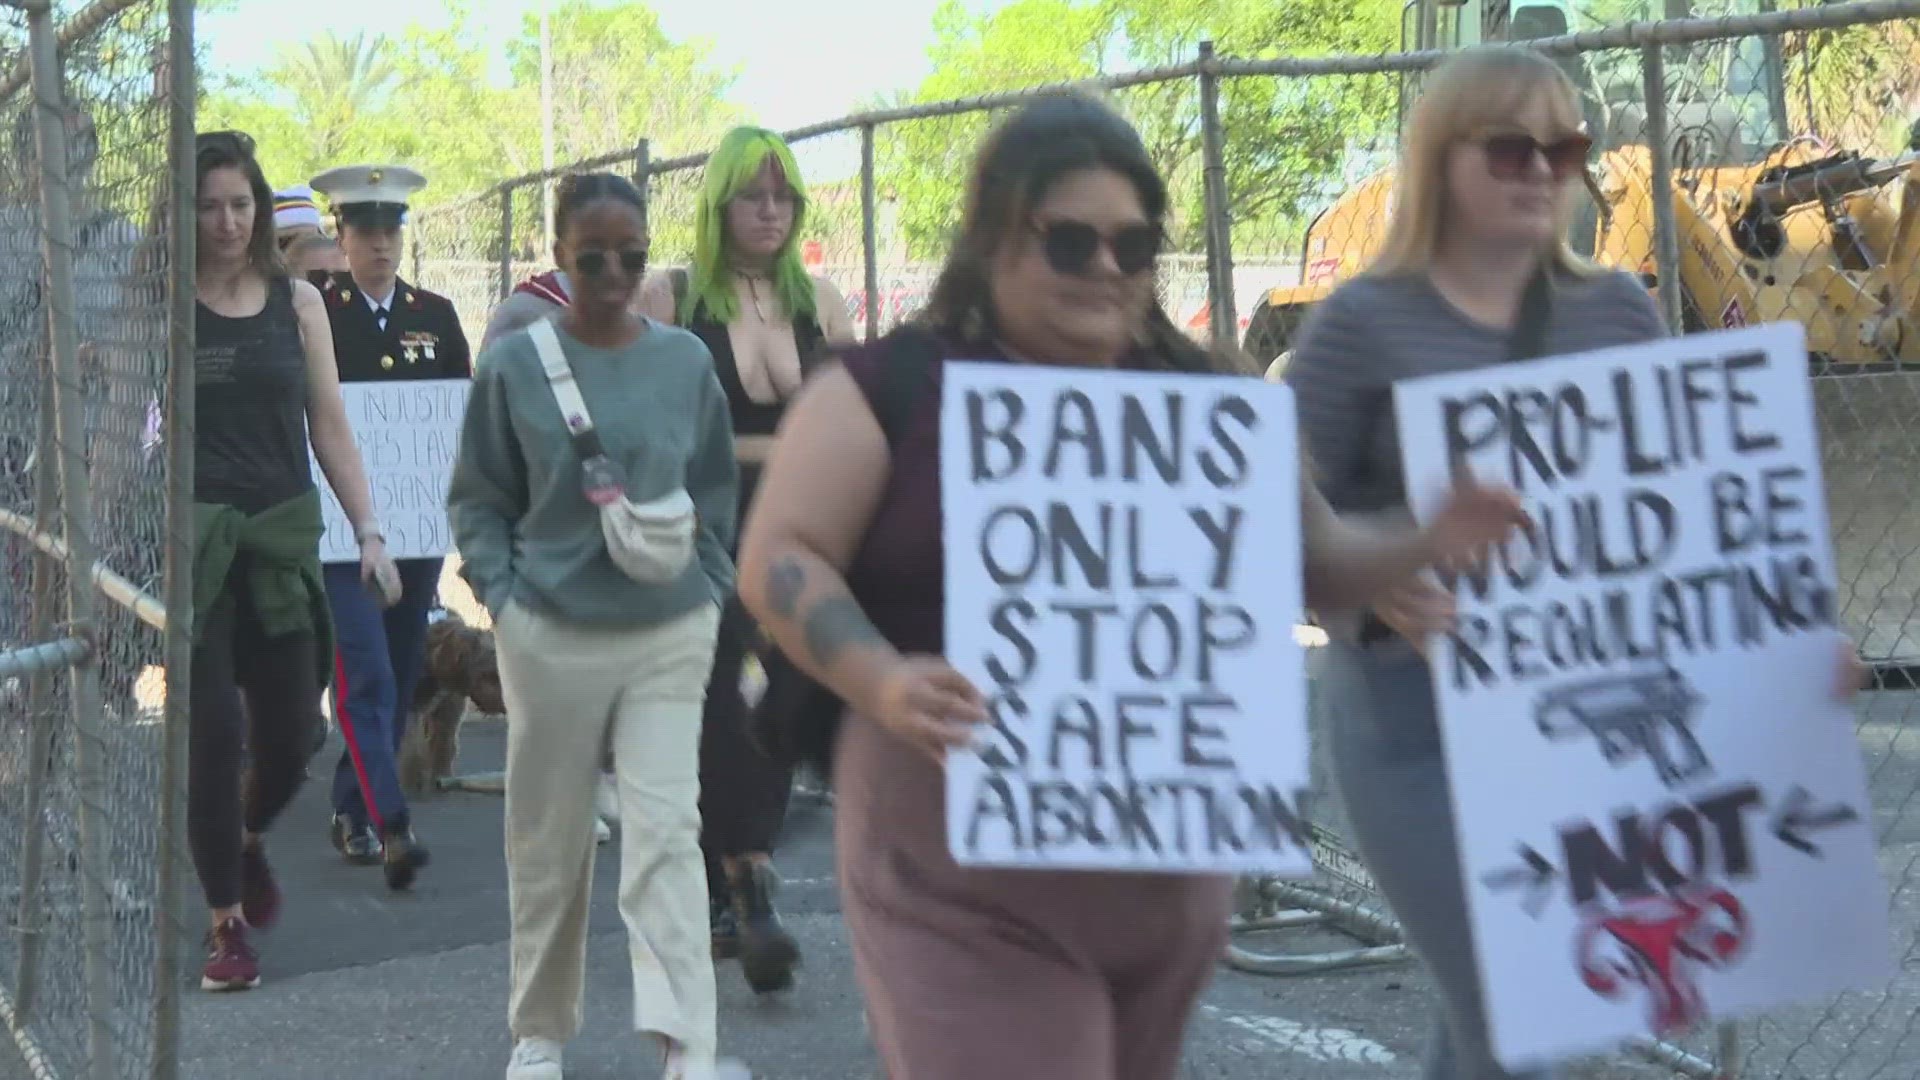 Activists marched in downtown Jacksonville calling for voters to head to the polls in November to cast their ballots.